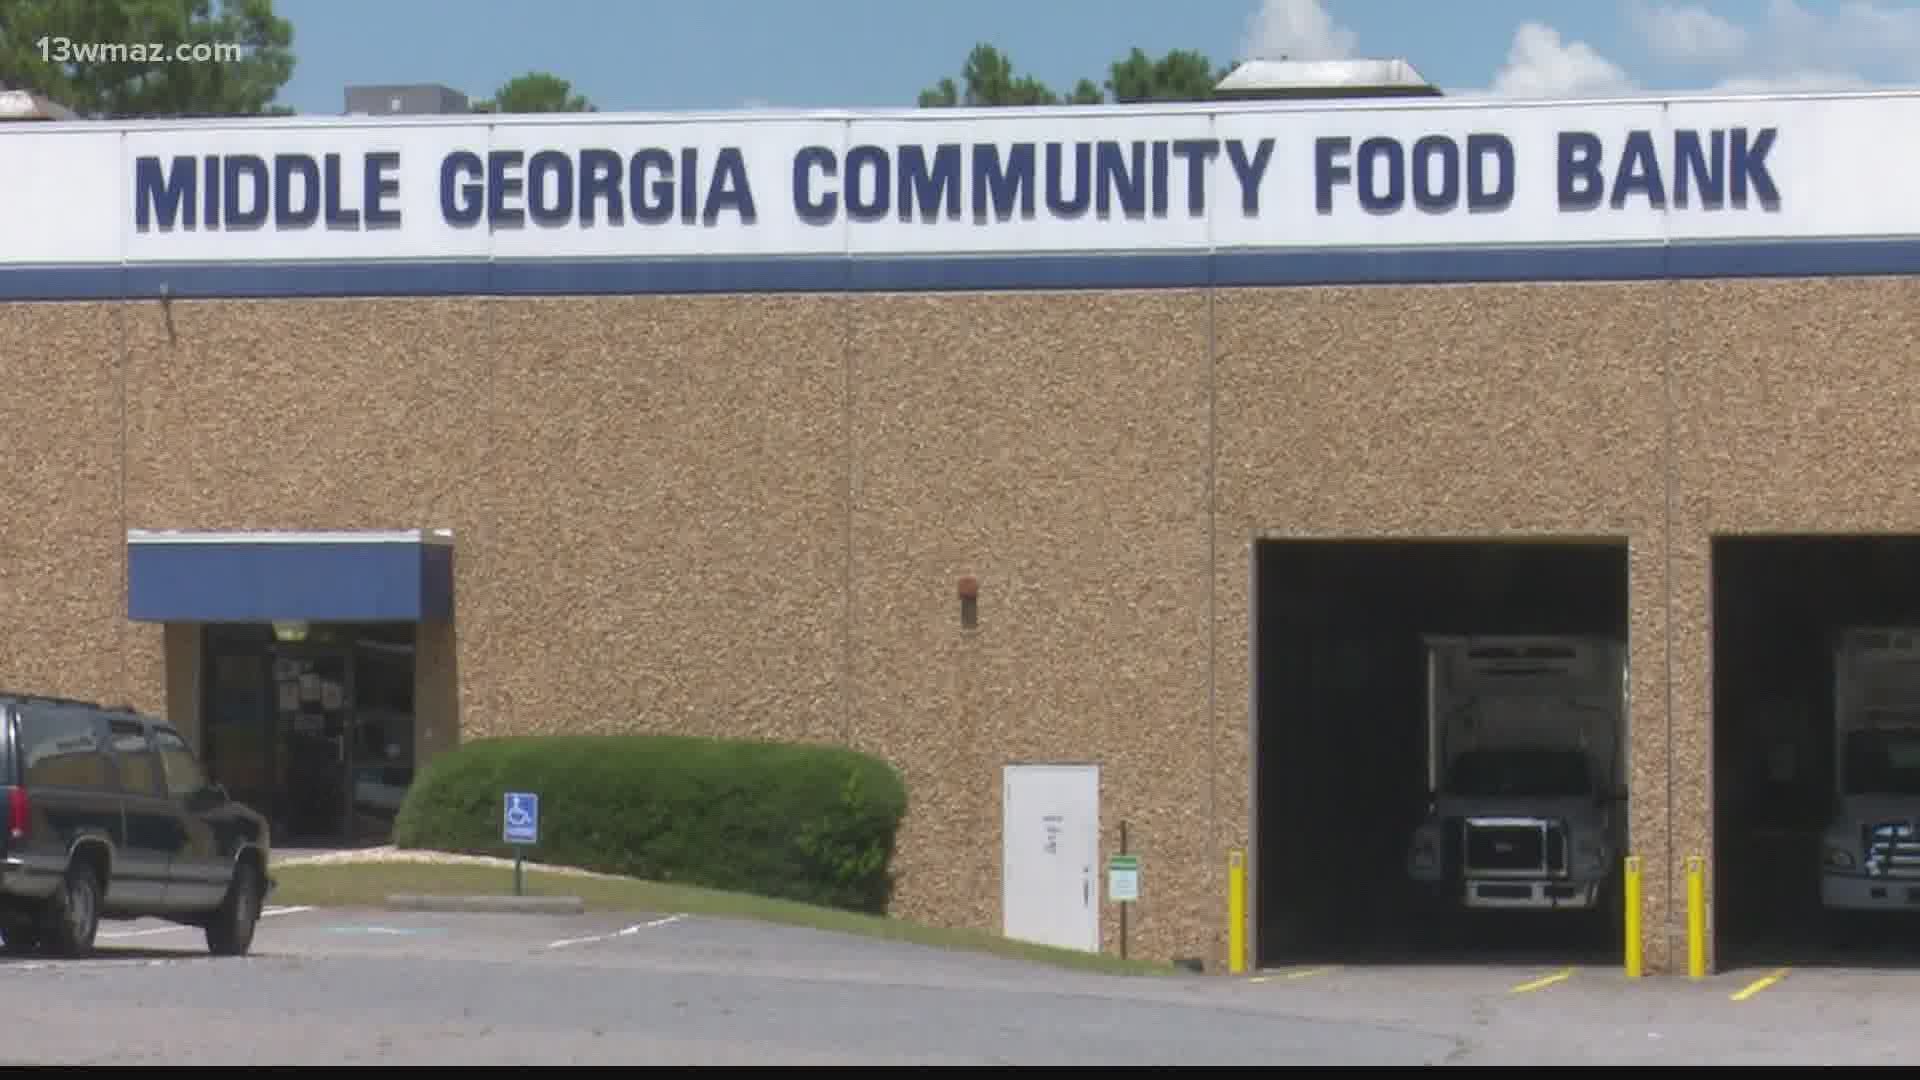 The Middle Georgia Community Food Bank is helping several communities this week, serving healthy food to people.